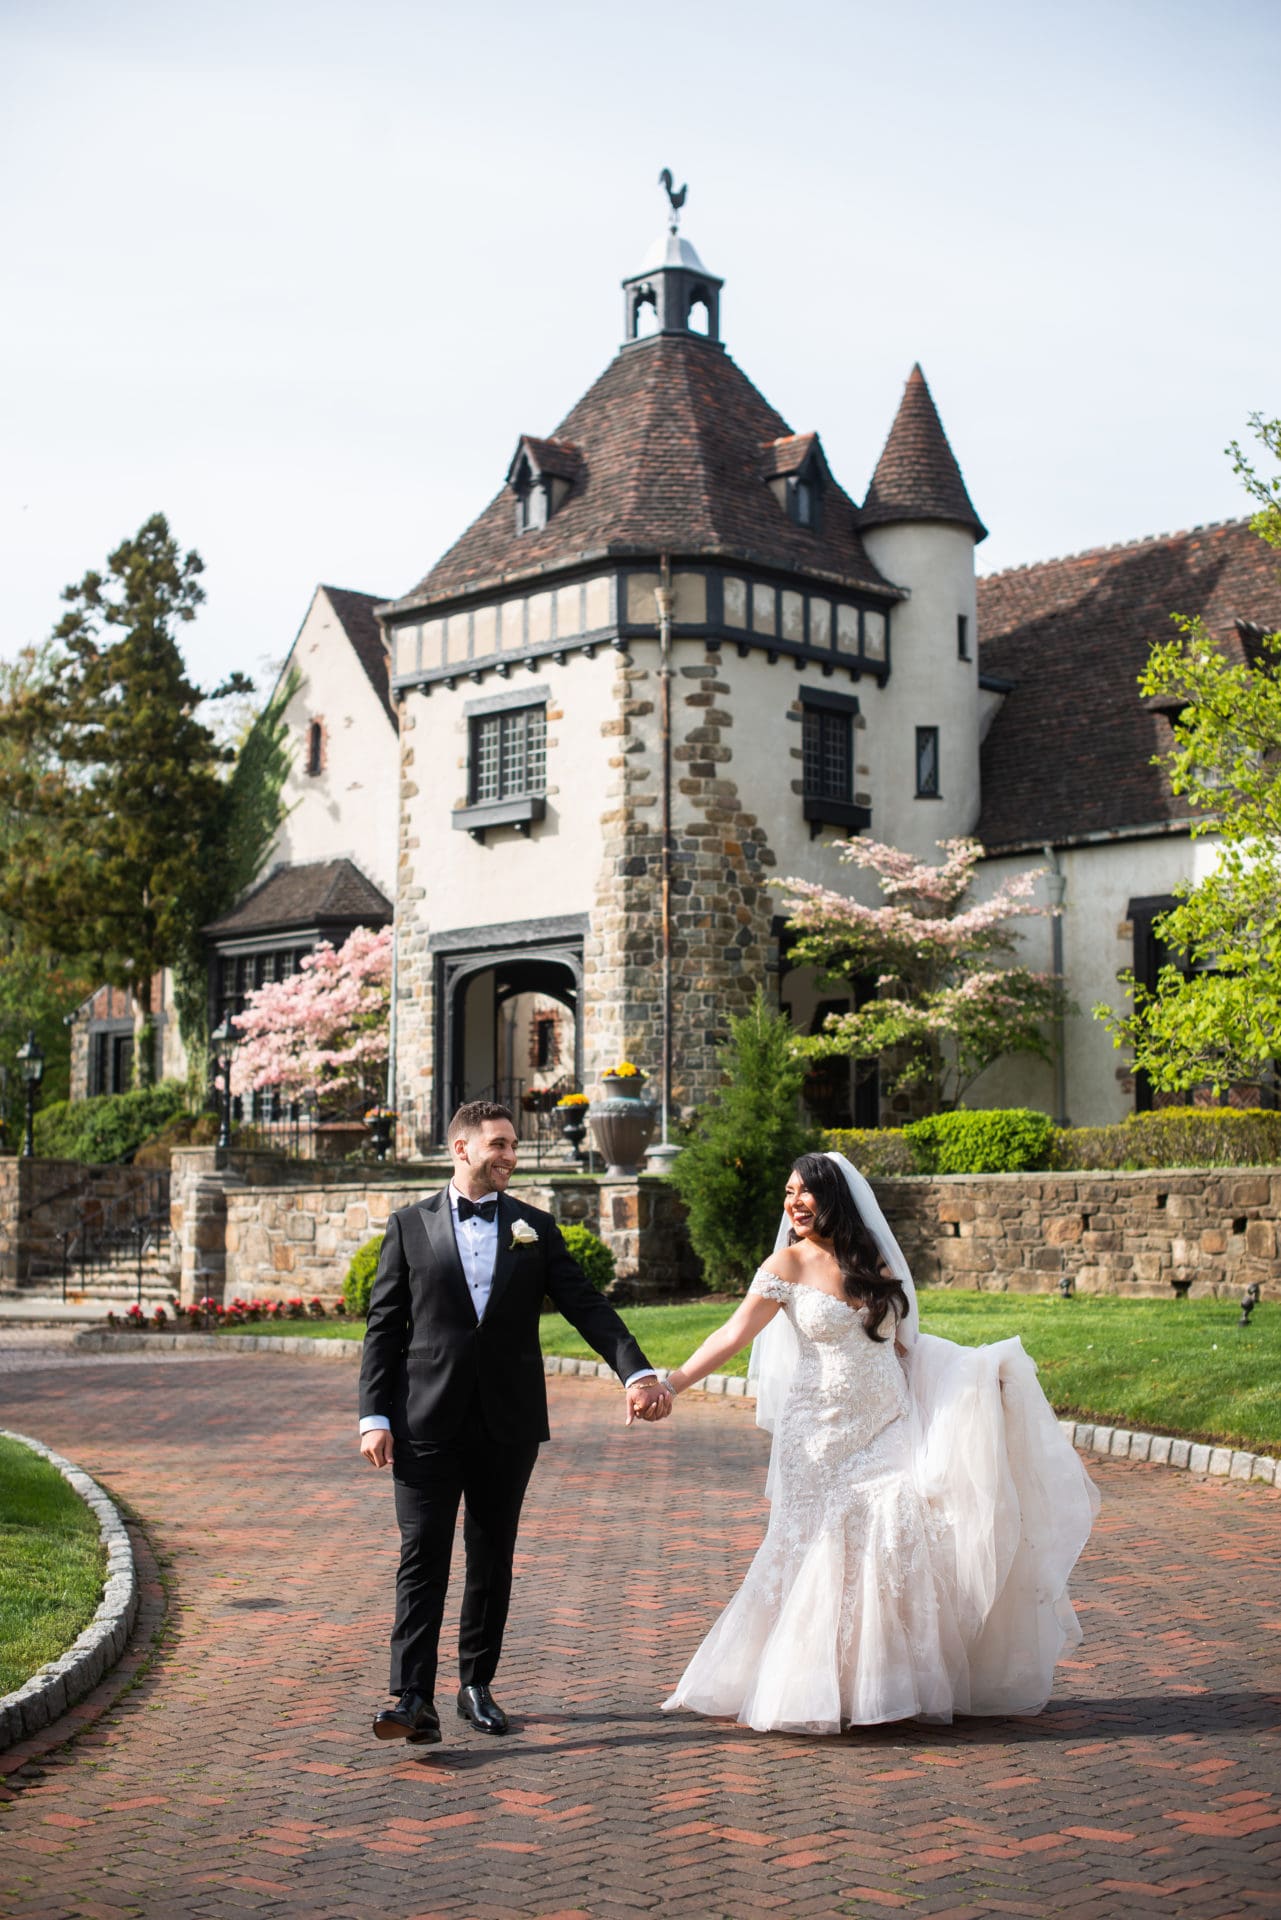 Bride and groom walking in front of the Pleasantdale Chateau